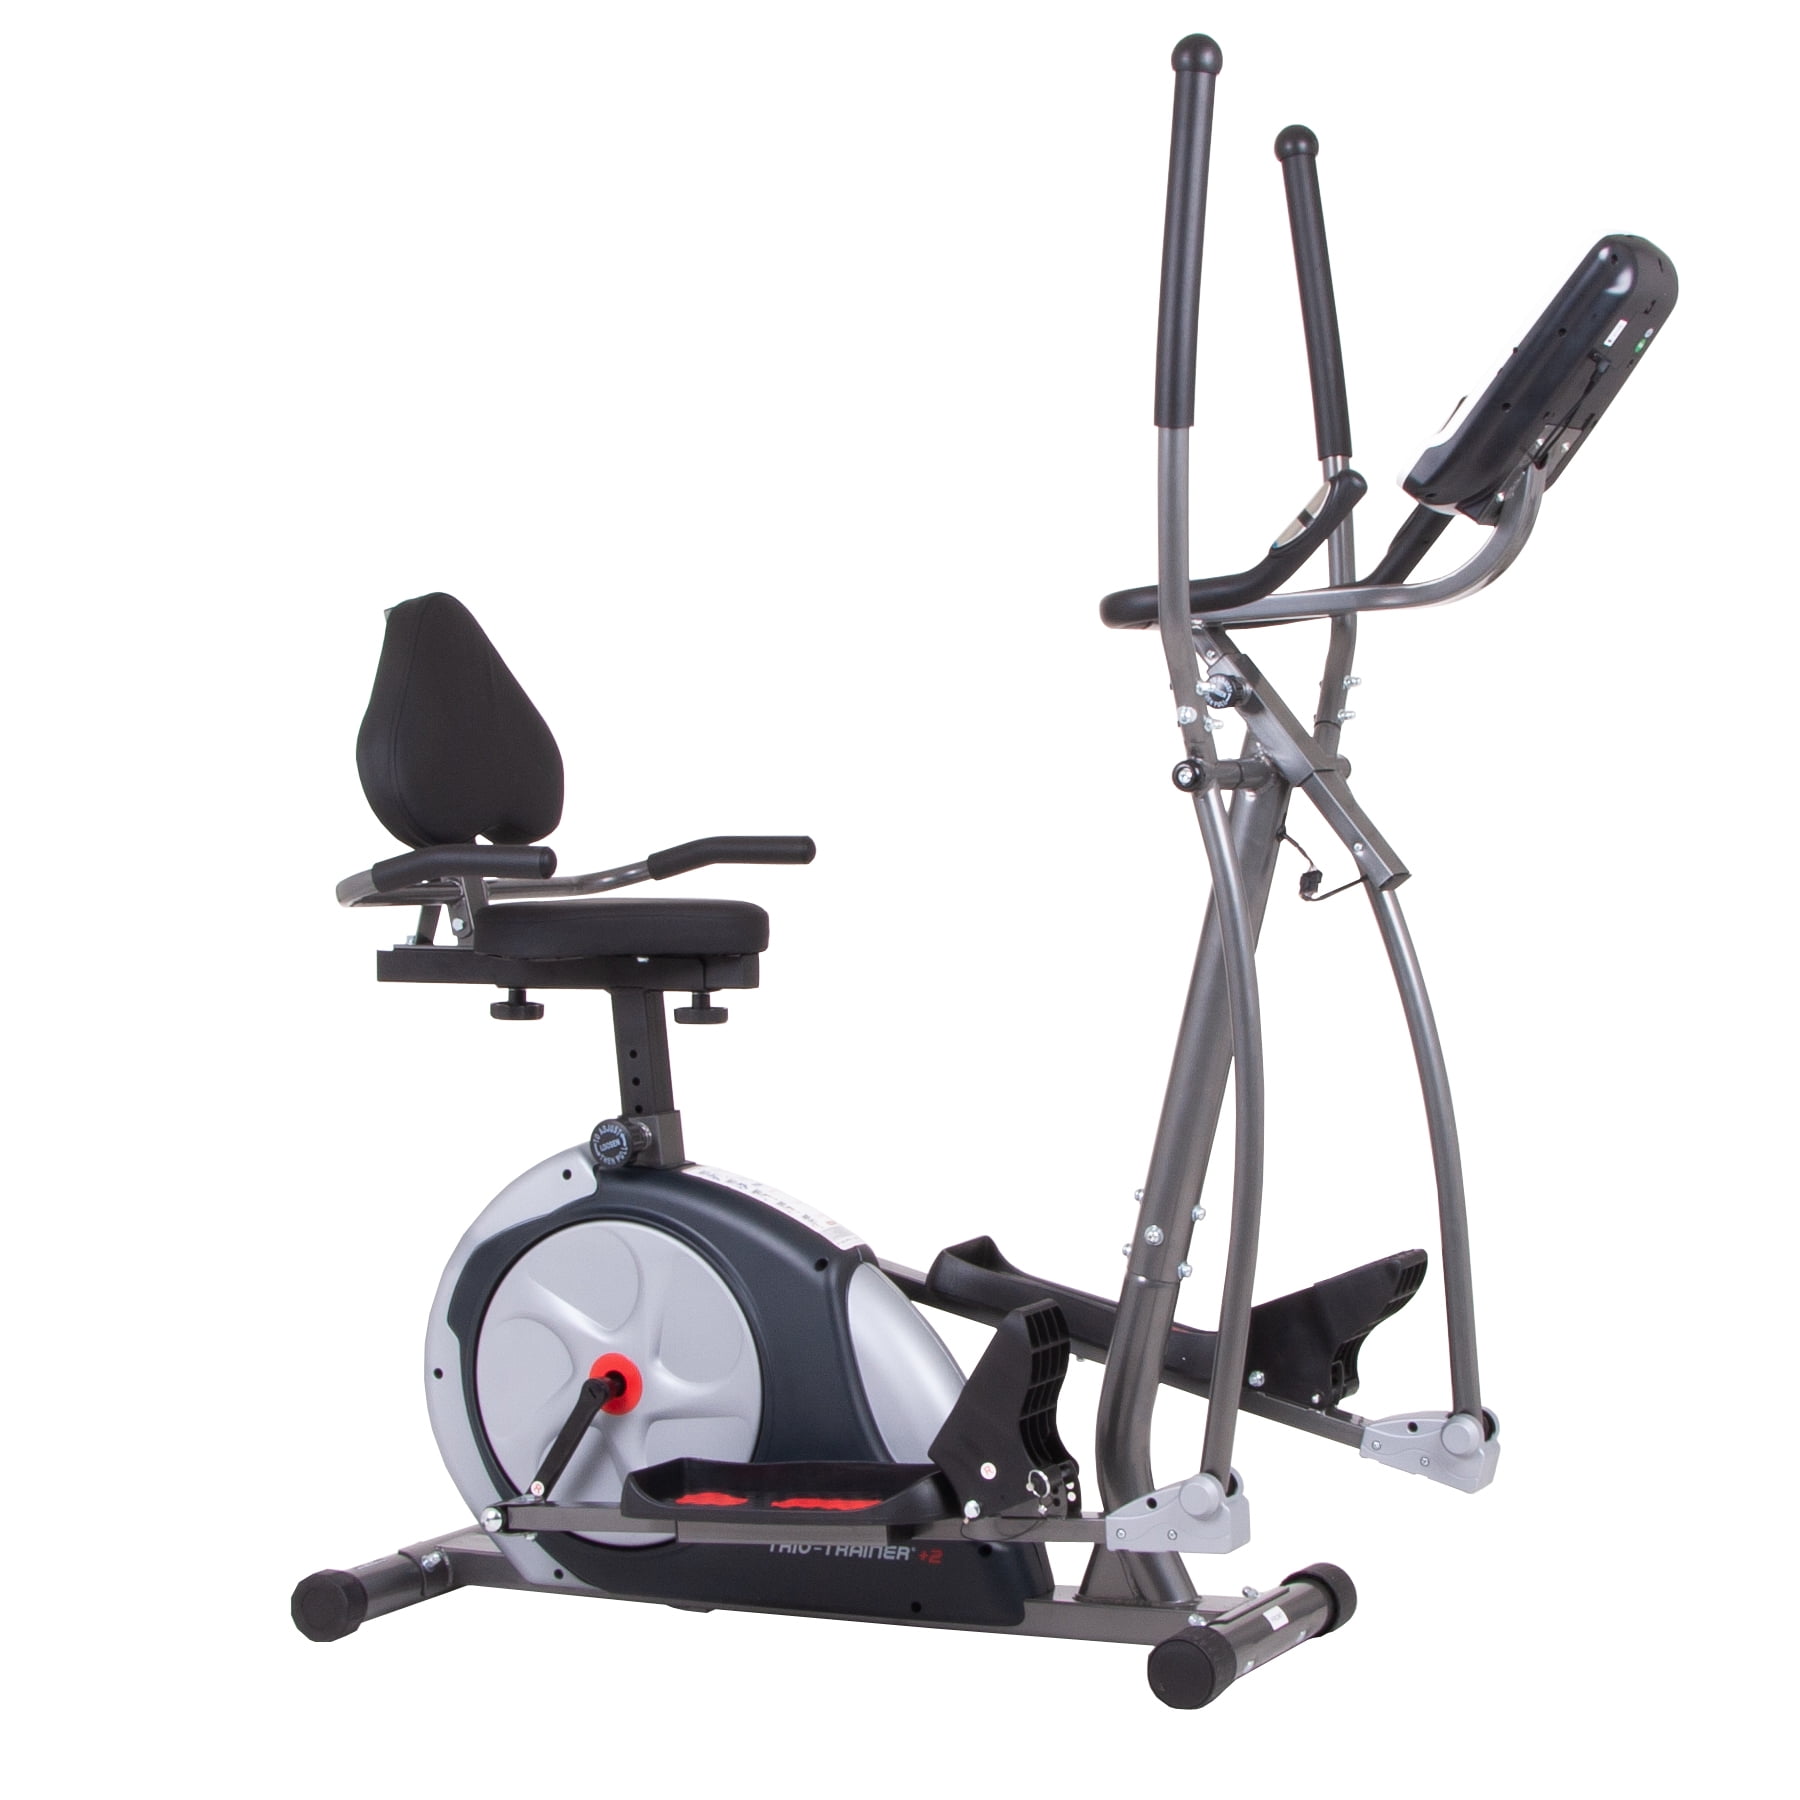 2 in 1 Elliptical Machine Exercise Upright Fan Bike Dual Action Trainer Fitness 